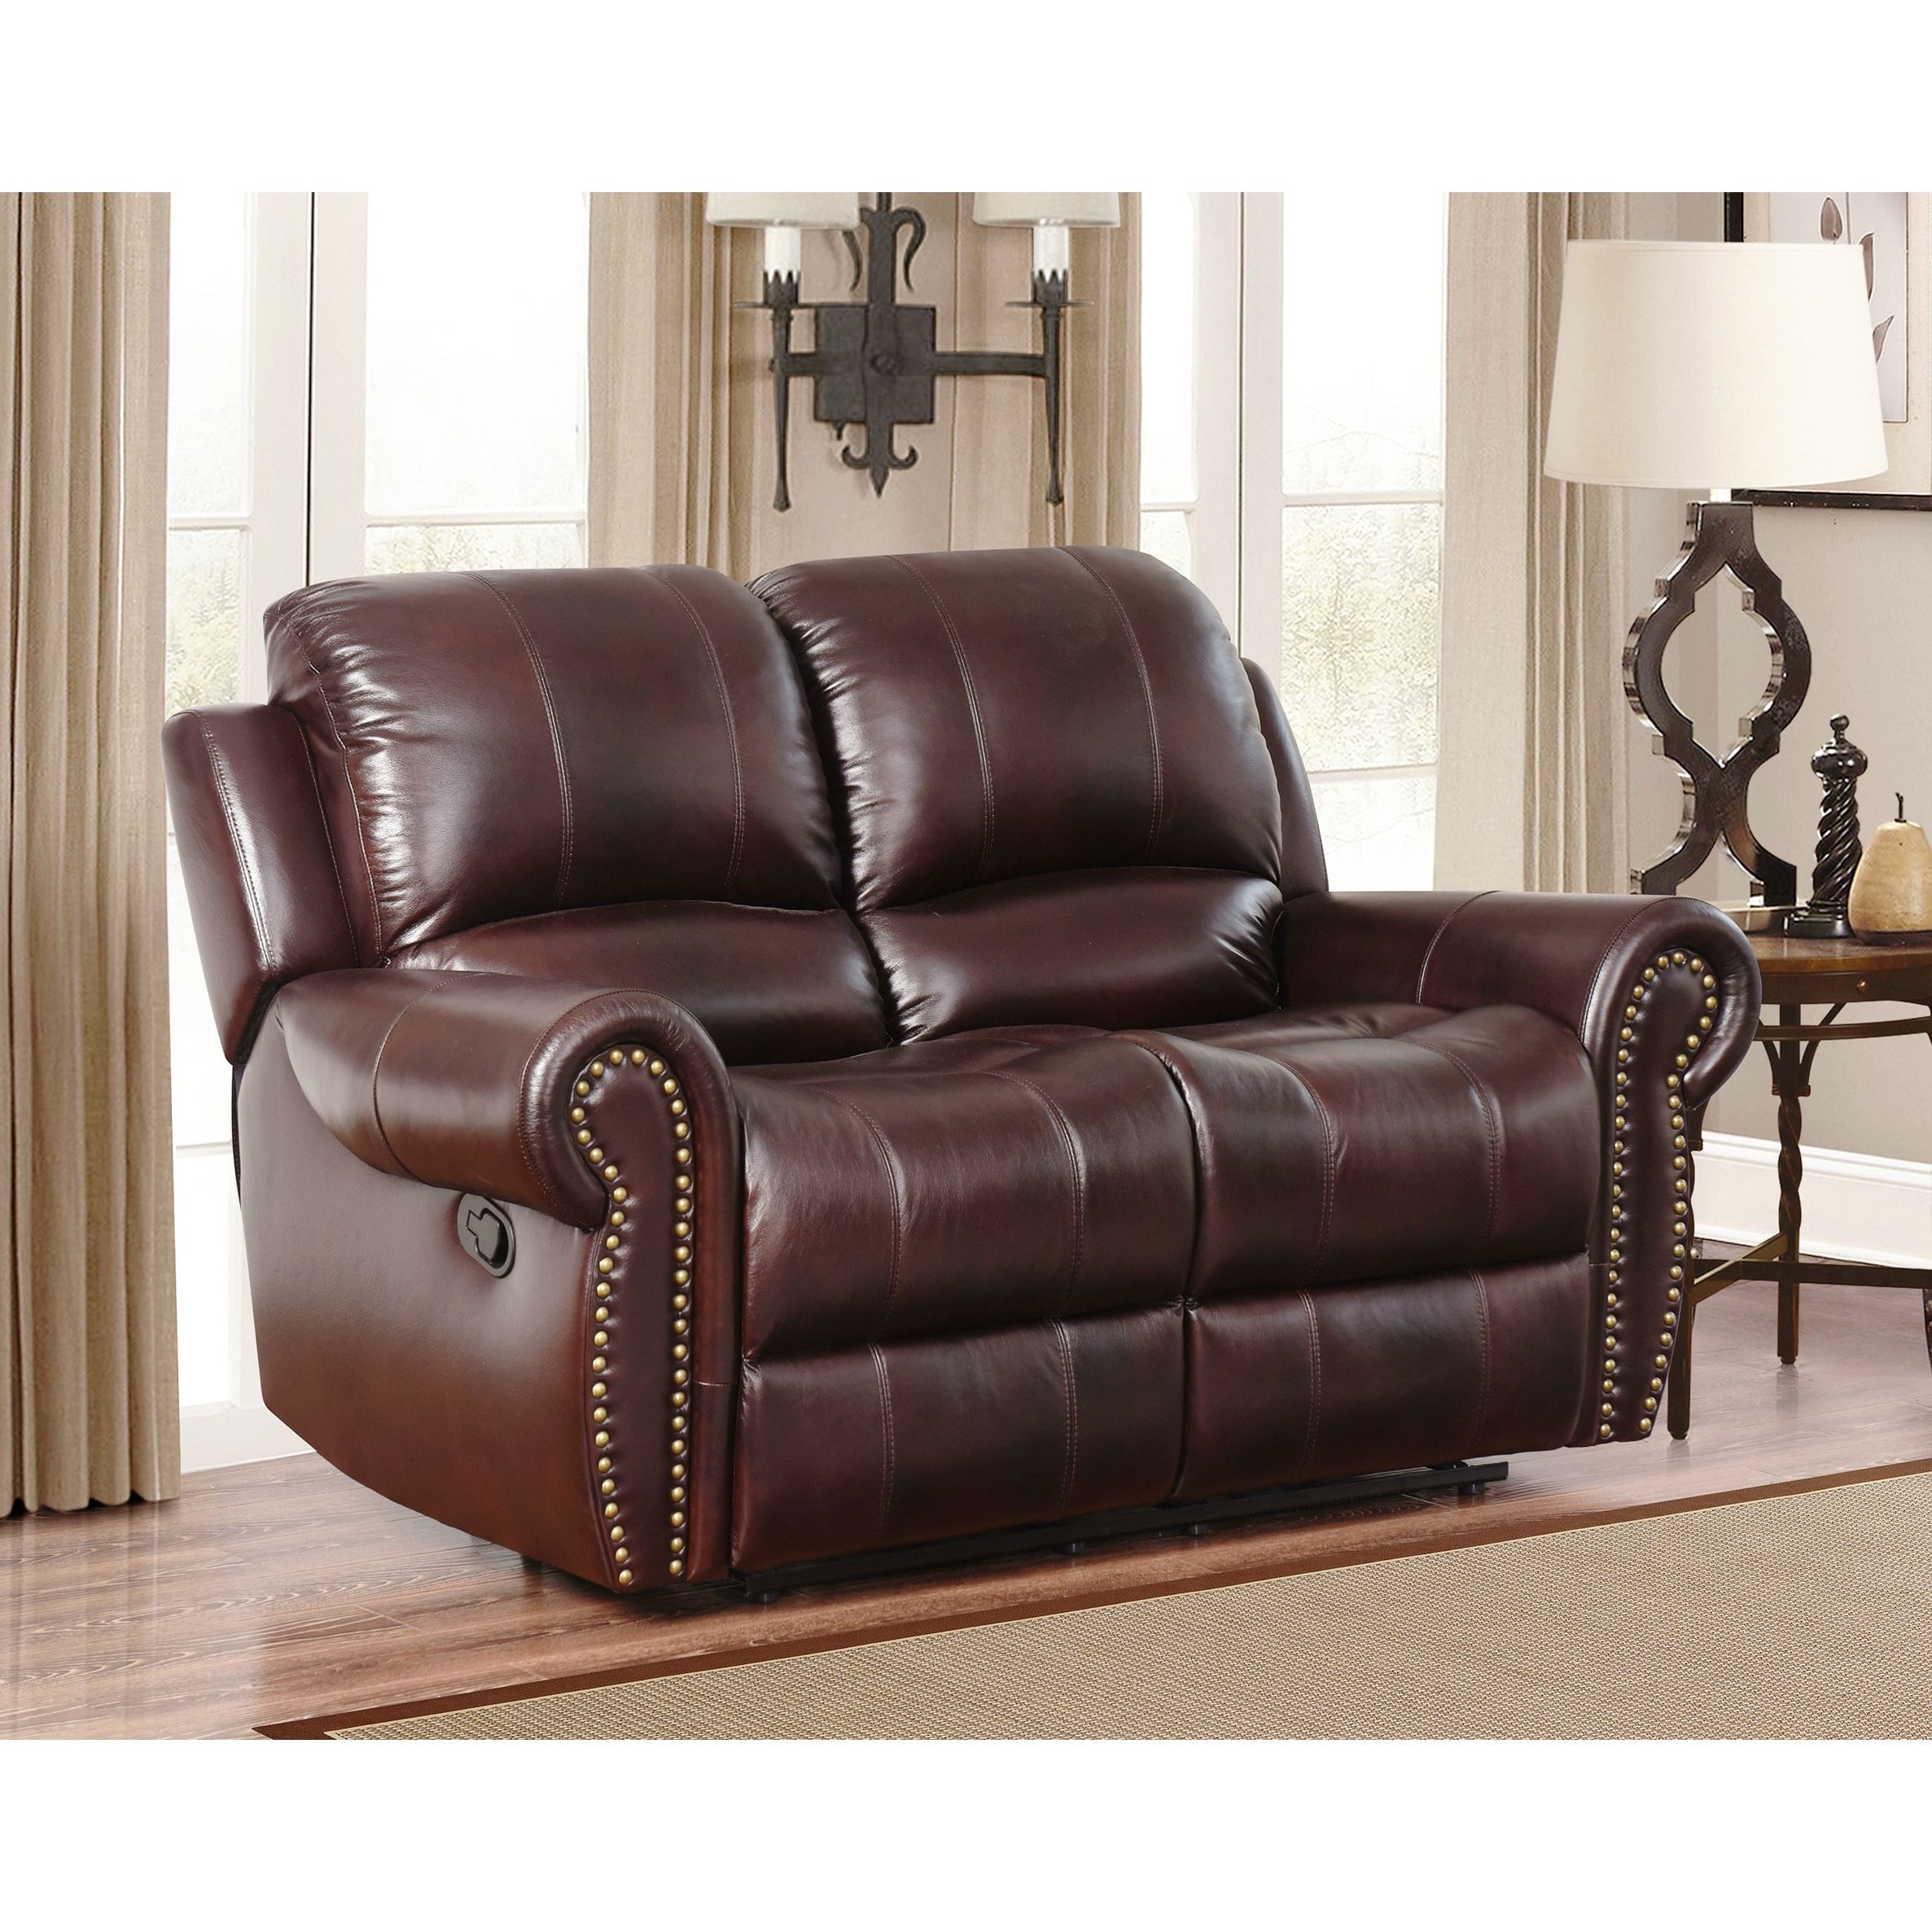 Top Grain Leather Loveseats Intended For Widely Used Abbyson Broadway Top Grain Leather Reclining Loveseat Brown With (Photo 1 of 15)